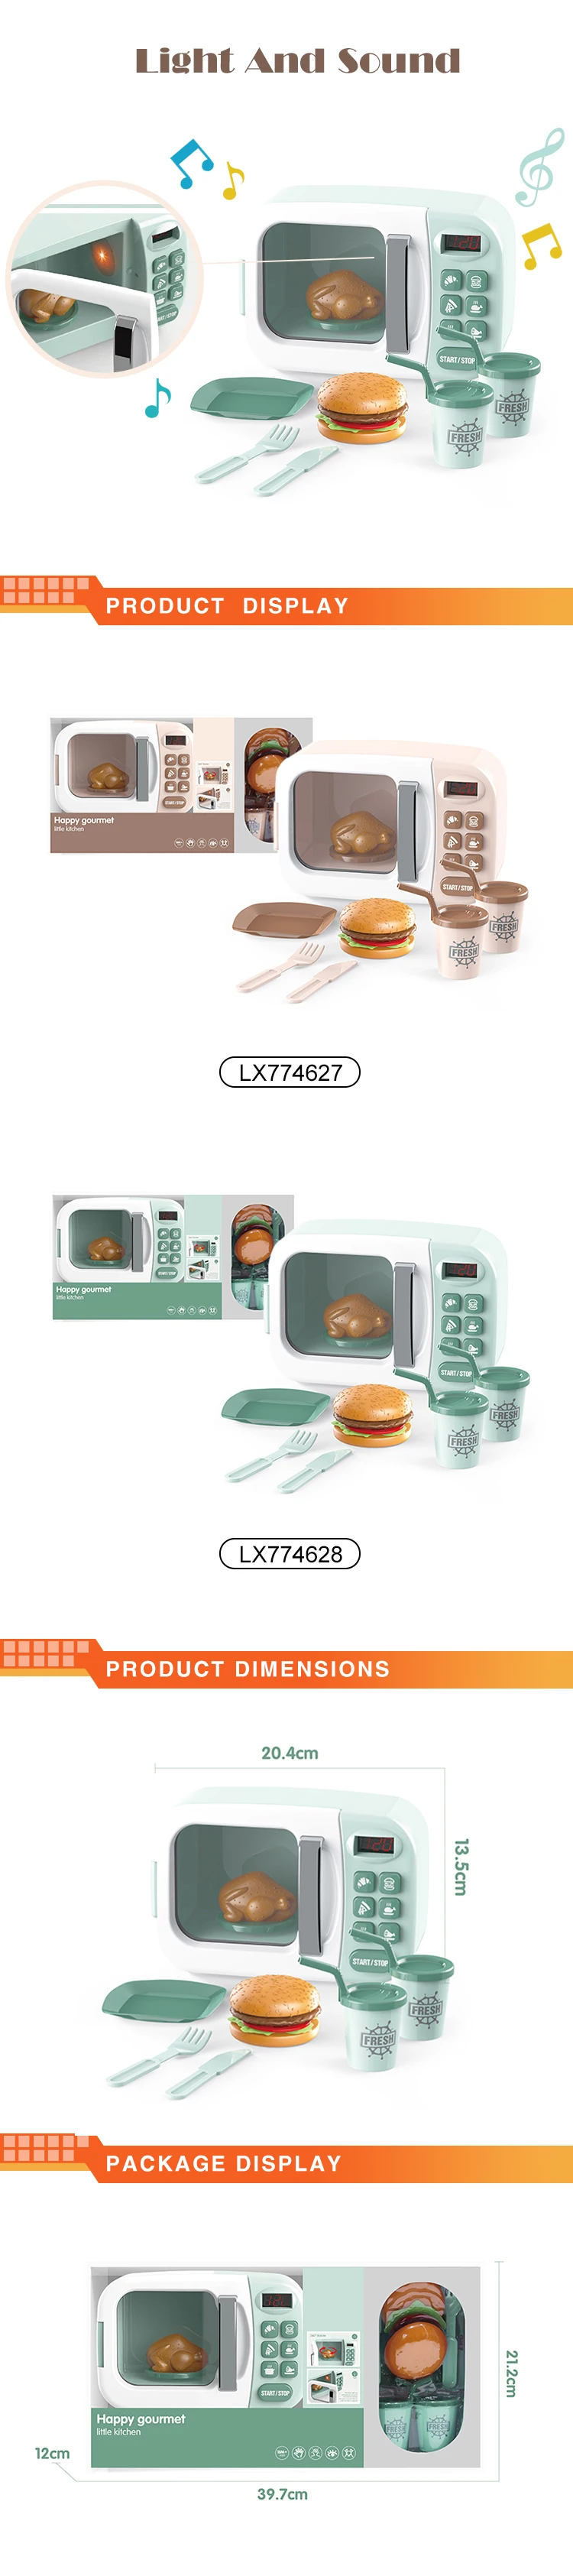 Amazon best selling plastic kitchen battery operated microwave oven toy with sound and light